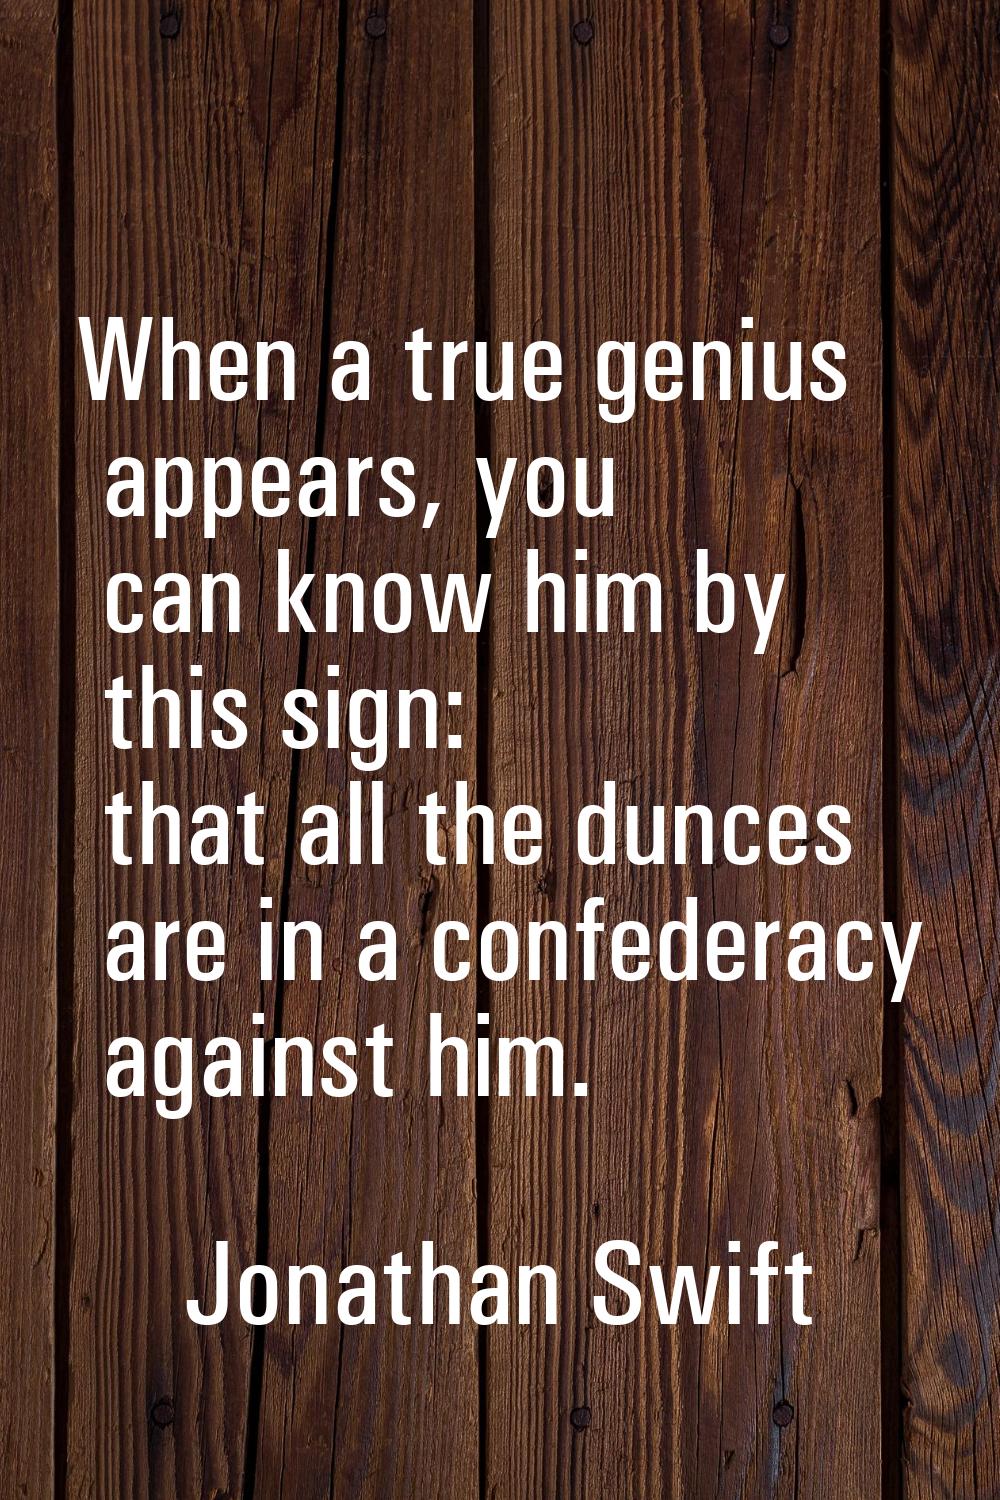 When a true genius appears, you can know him by this sign: that all the dunces are in a confederacy